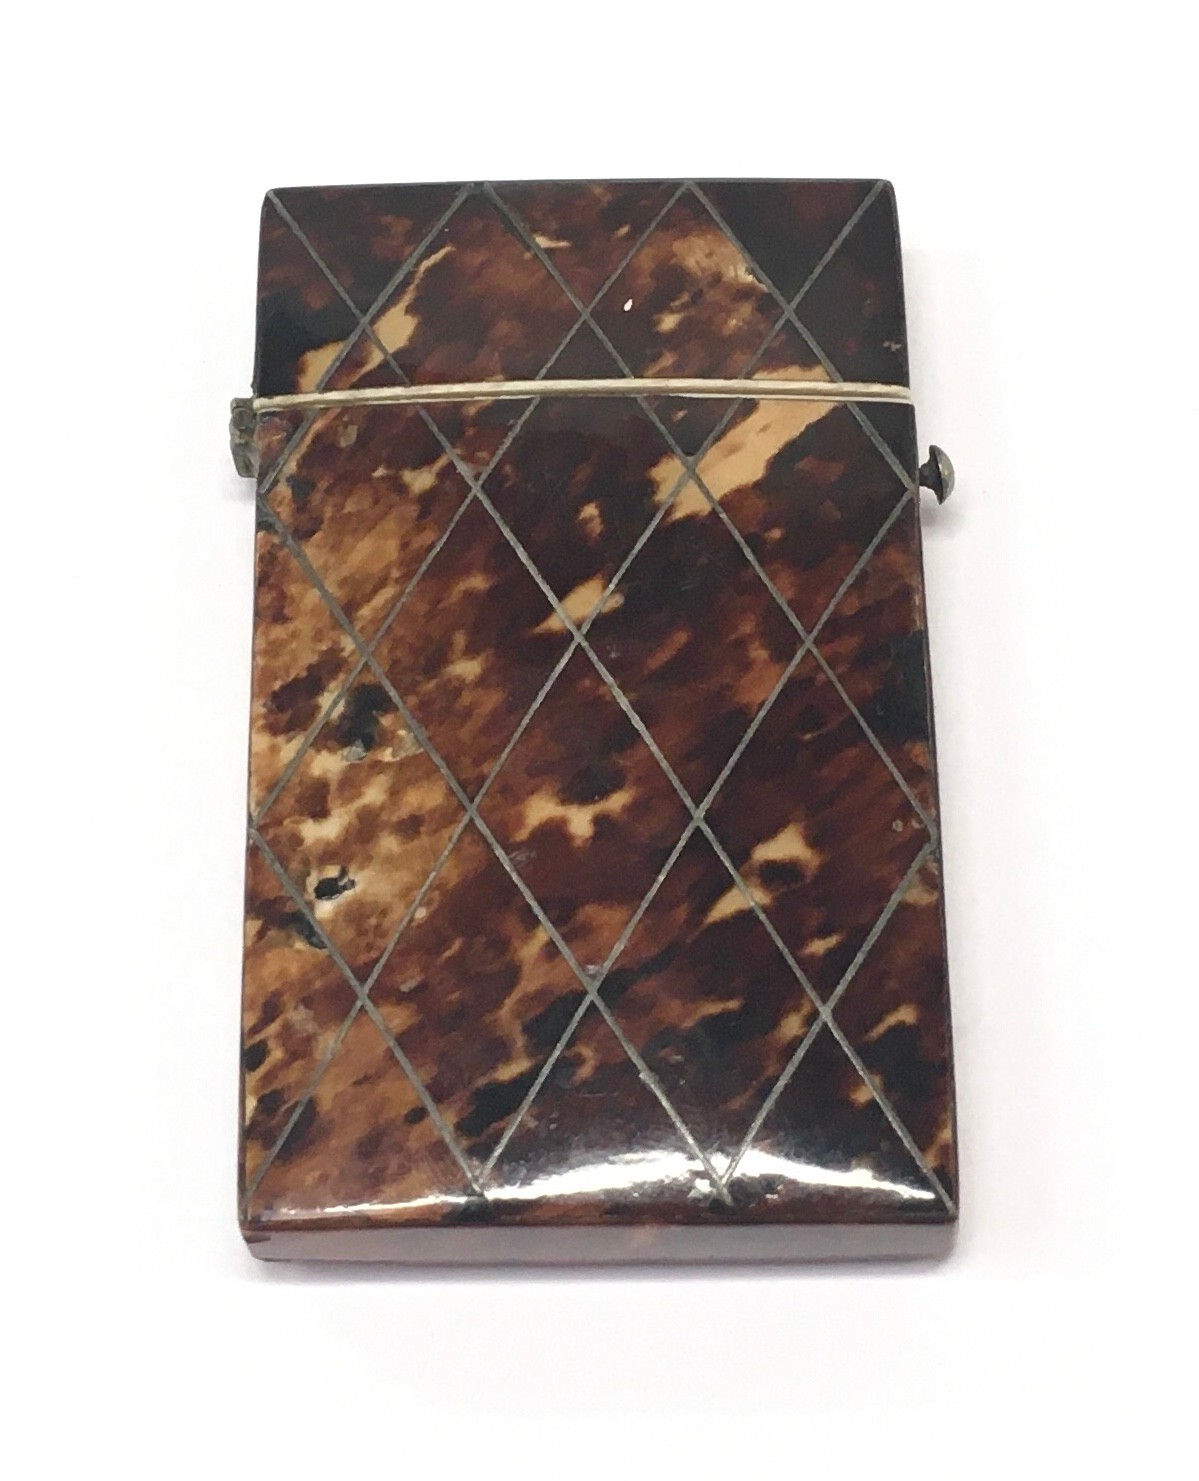 Tortoiseshell card case with white metal inlaid decoration.